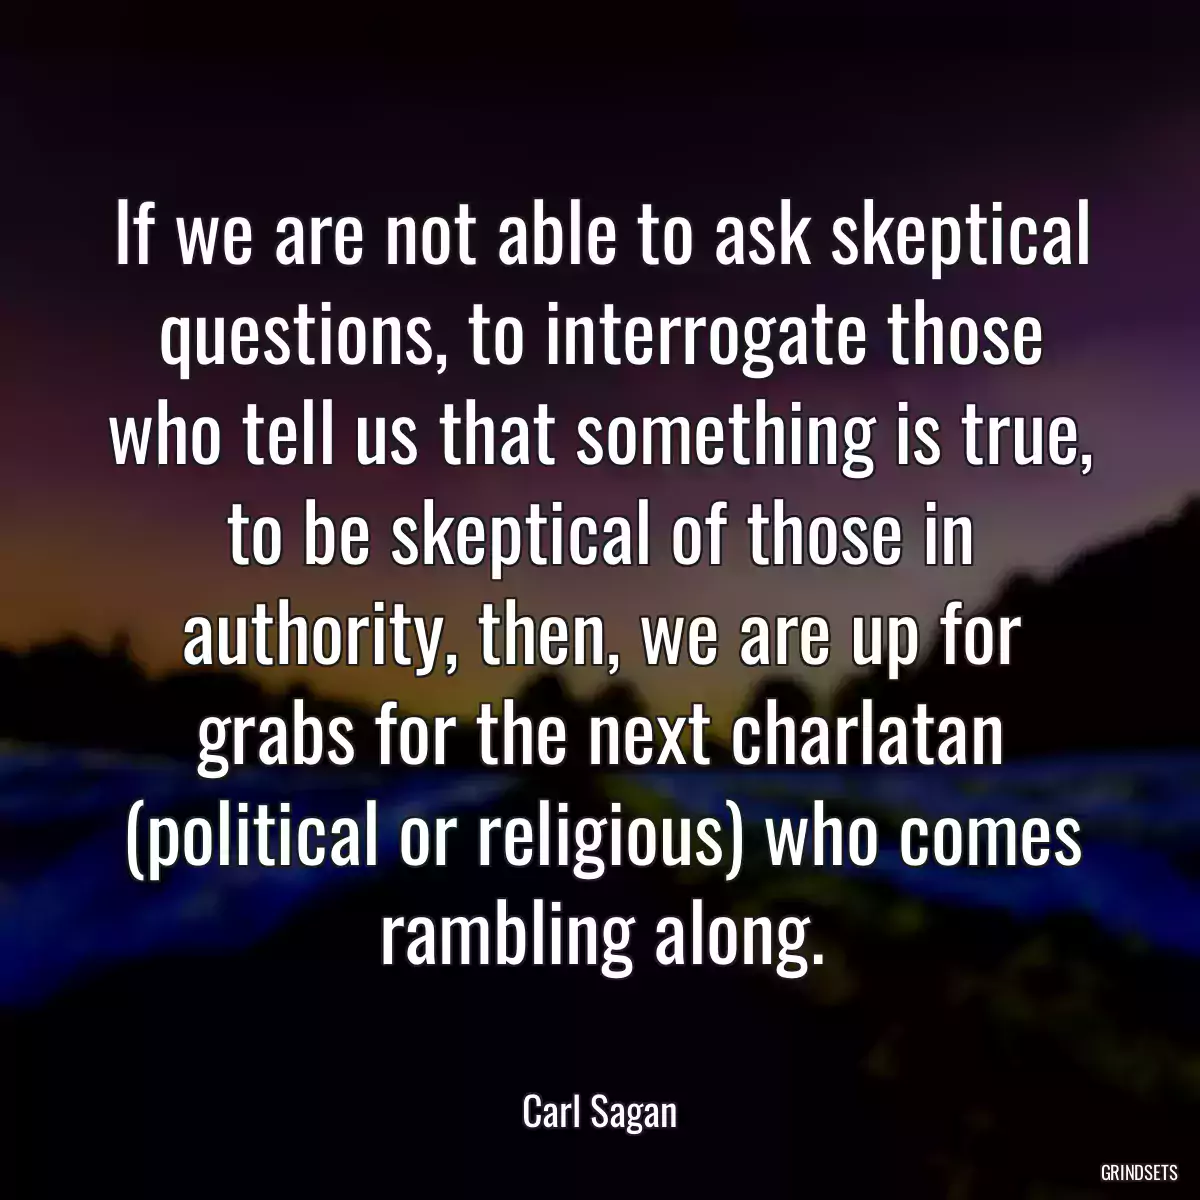 If we are not able to ask skeptical questions, to interrogate those who tell us that something is true, to be skeptical of those in authority, then, we are up for grabs for the next charlatan (political or religious) who comes rambling along.